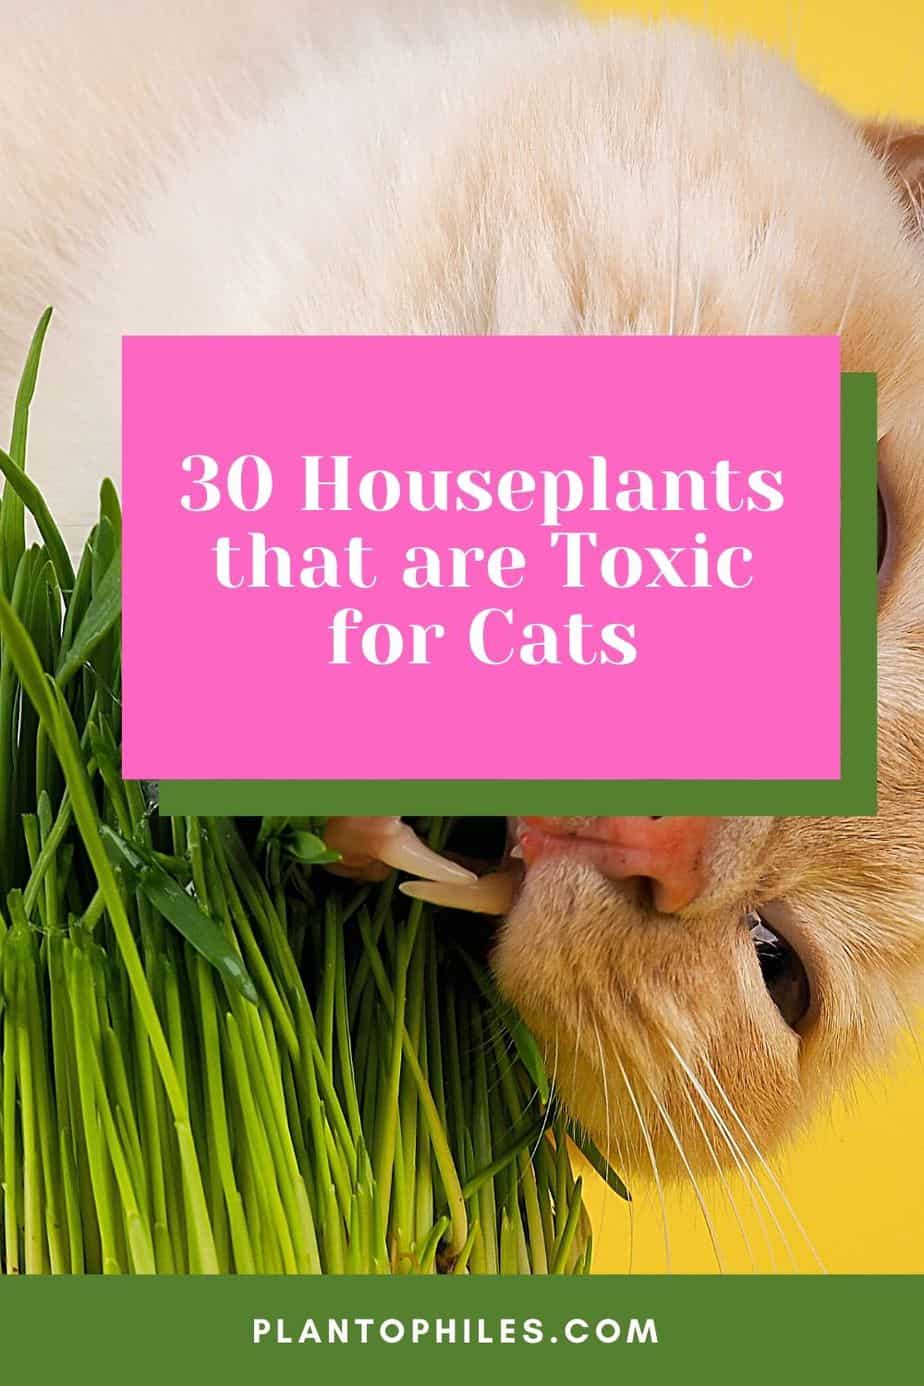 30 Plants That are Toxic for Cats